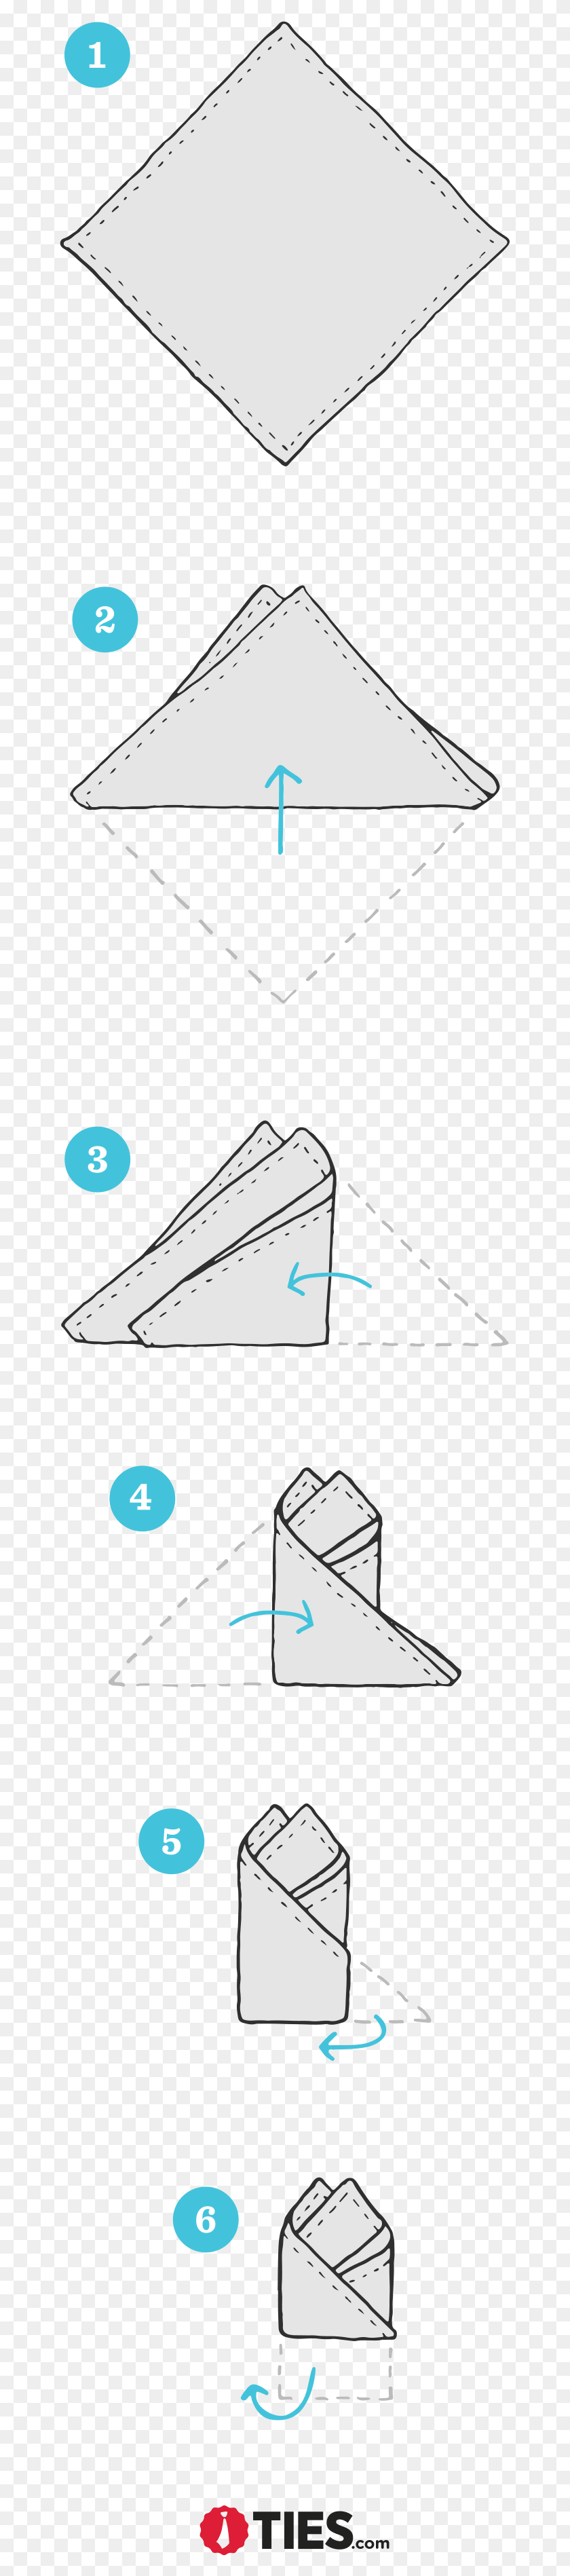 665x3735 The Two Peaks Folding Instructions Single Peak Pocket Square, Triangle, Cone, Wedge HD PNG Download